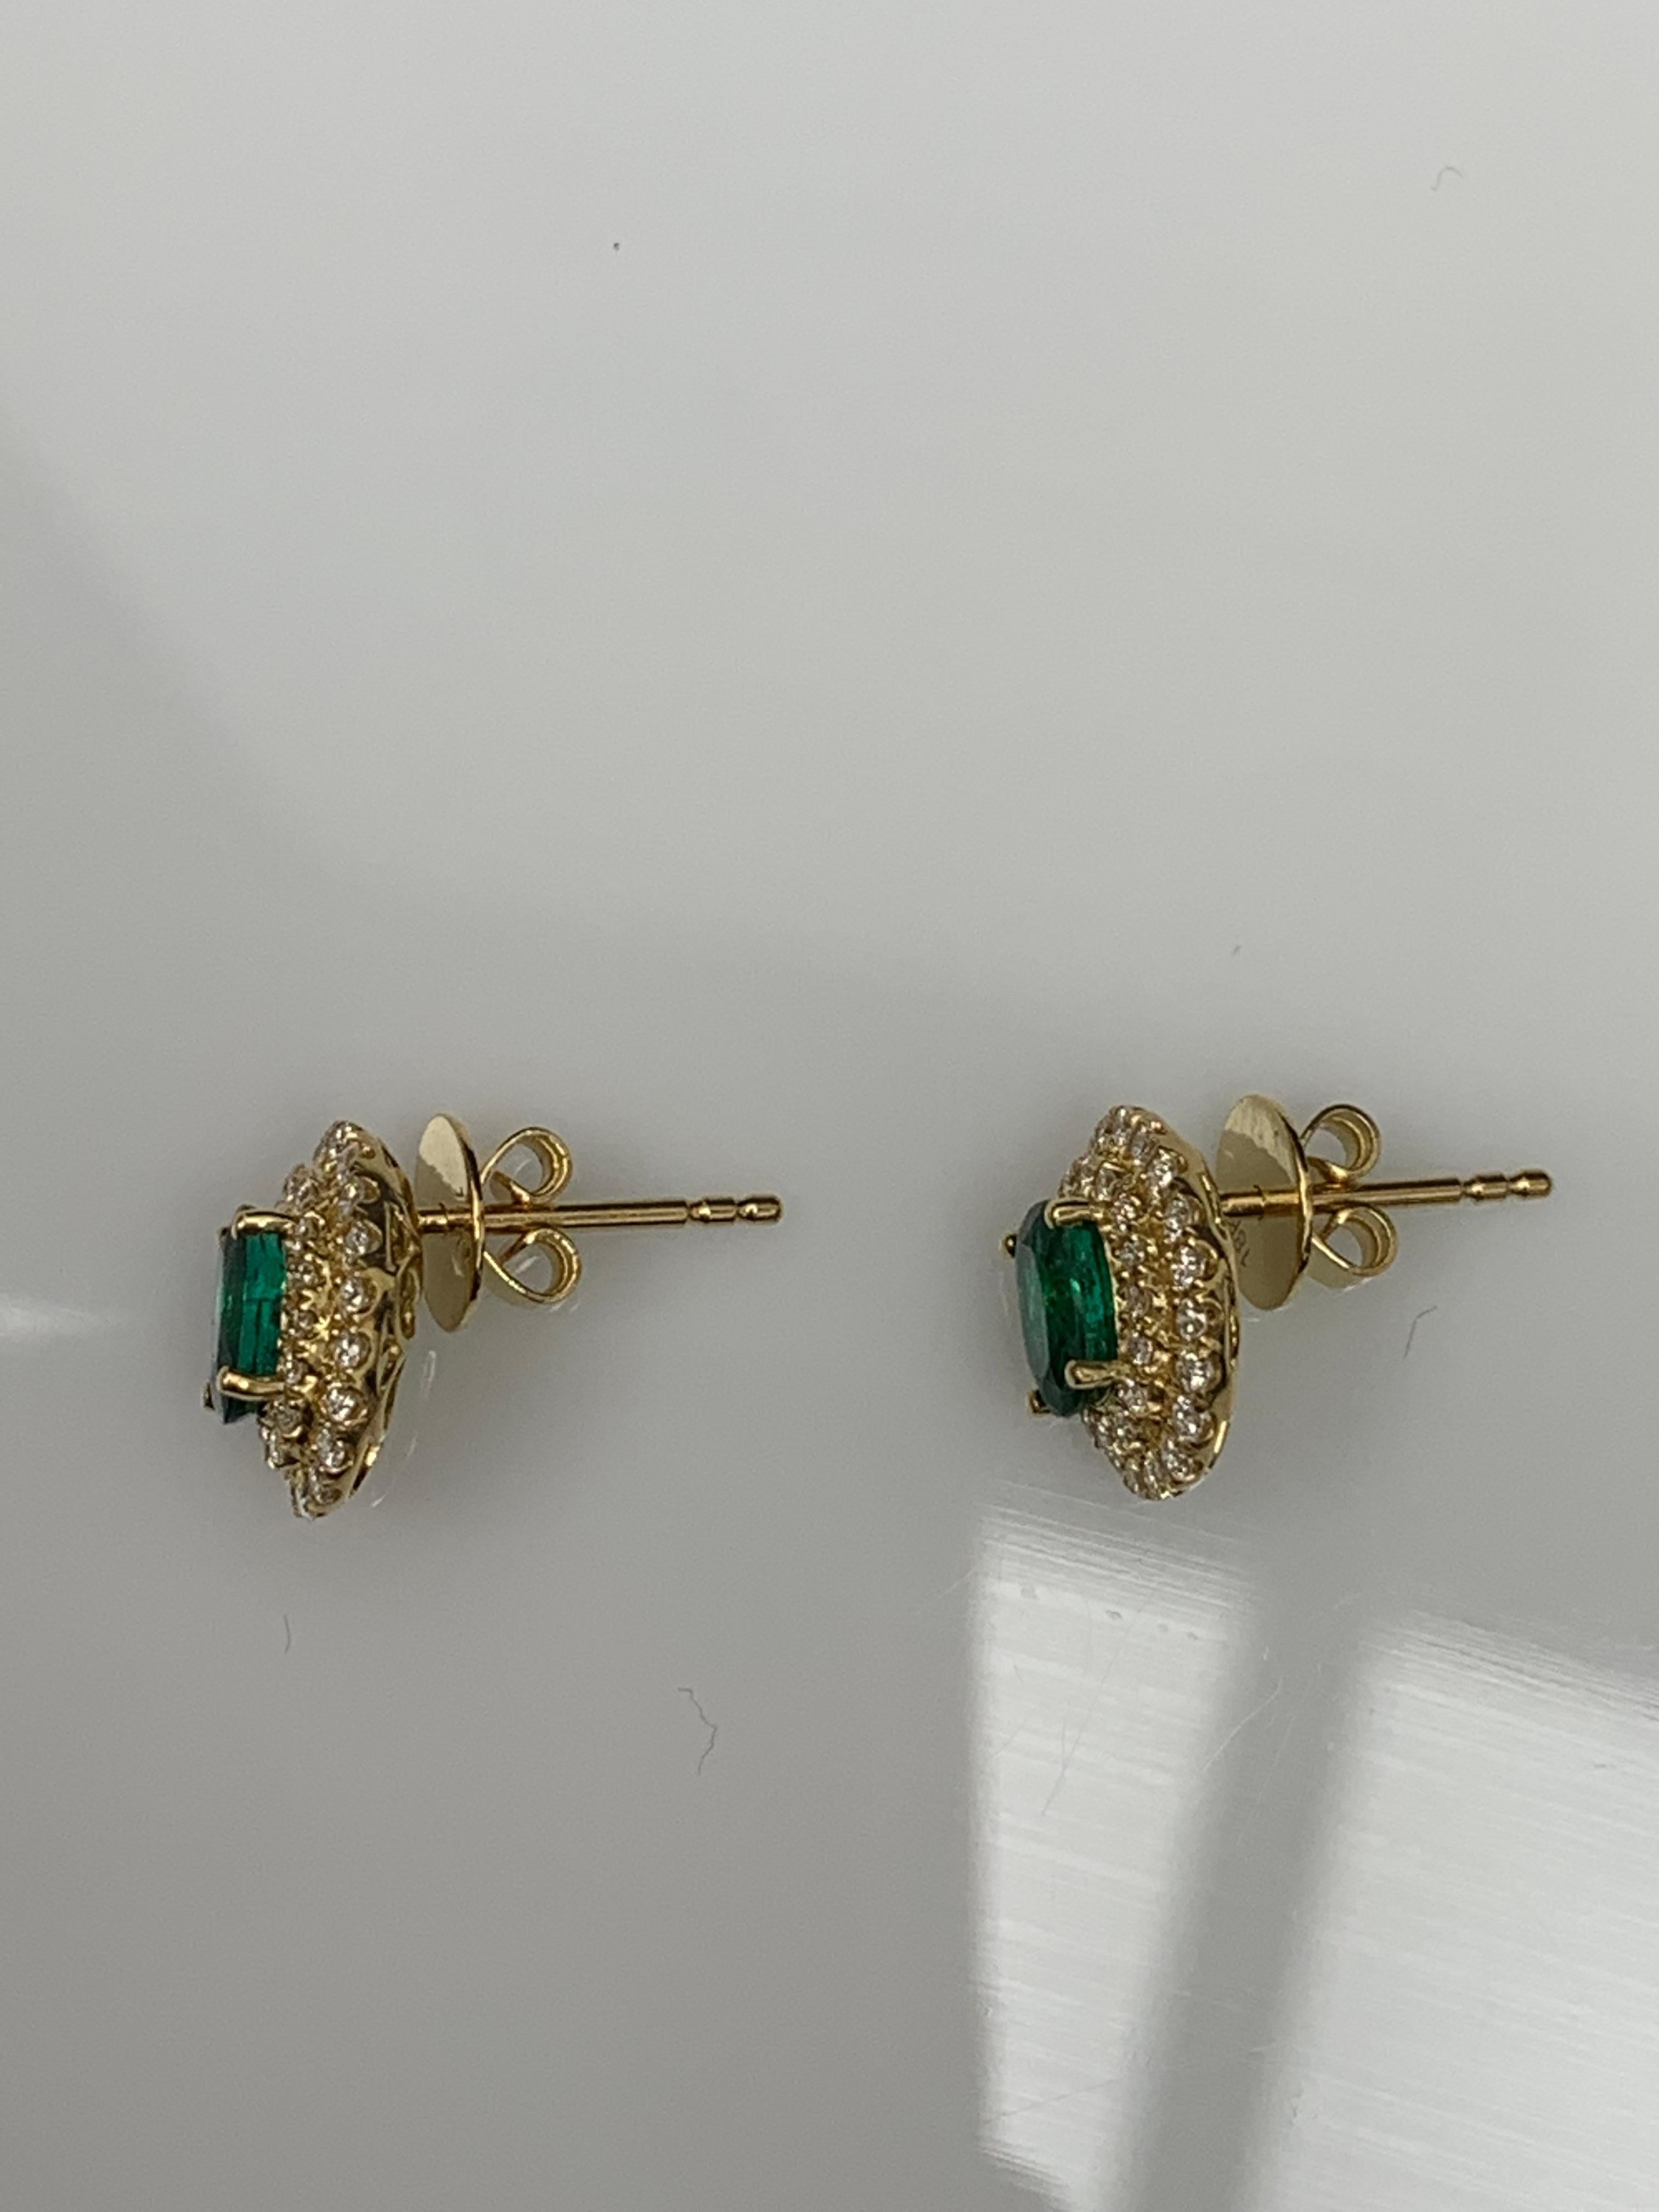 0.89 Carat Oval Cut Emerald and Diamond Stud Earrings in 18K Yellow Gold For Sale 6